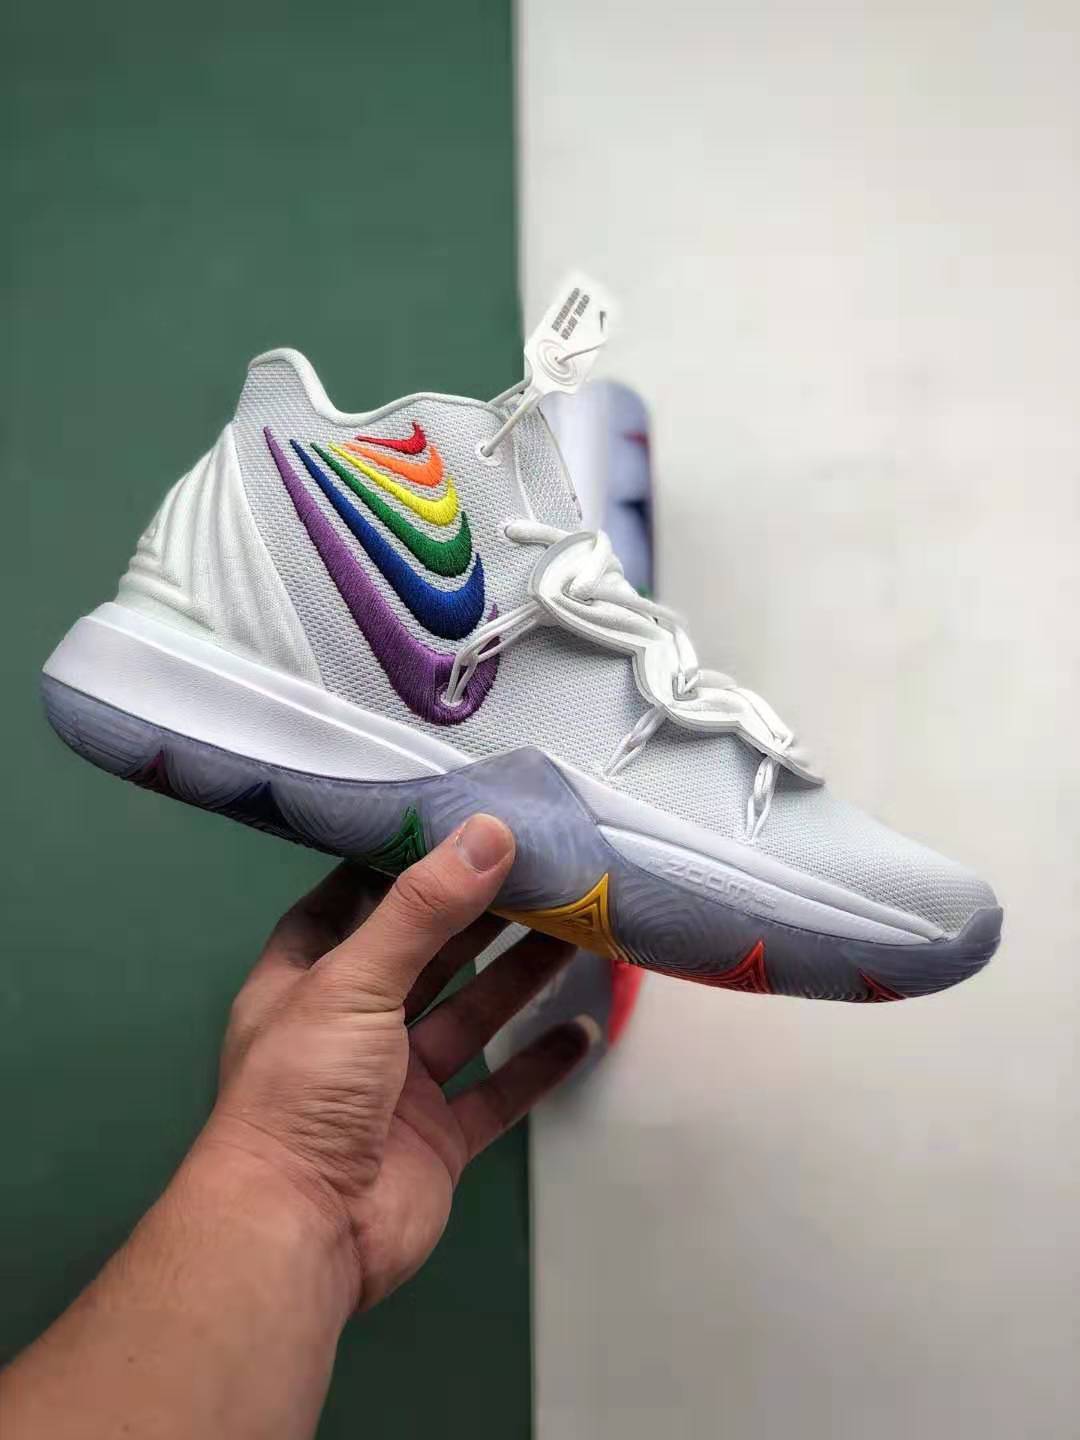 Nike Kyrie 5 BeTrue EP Rainbow Multi-Color CH0521-117 - Vibrant and Stylish Basketball Shoes